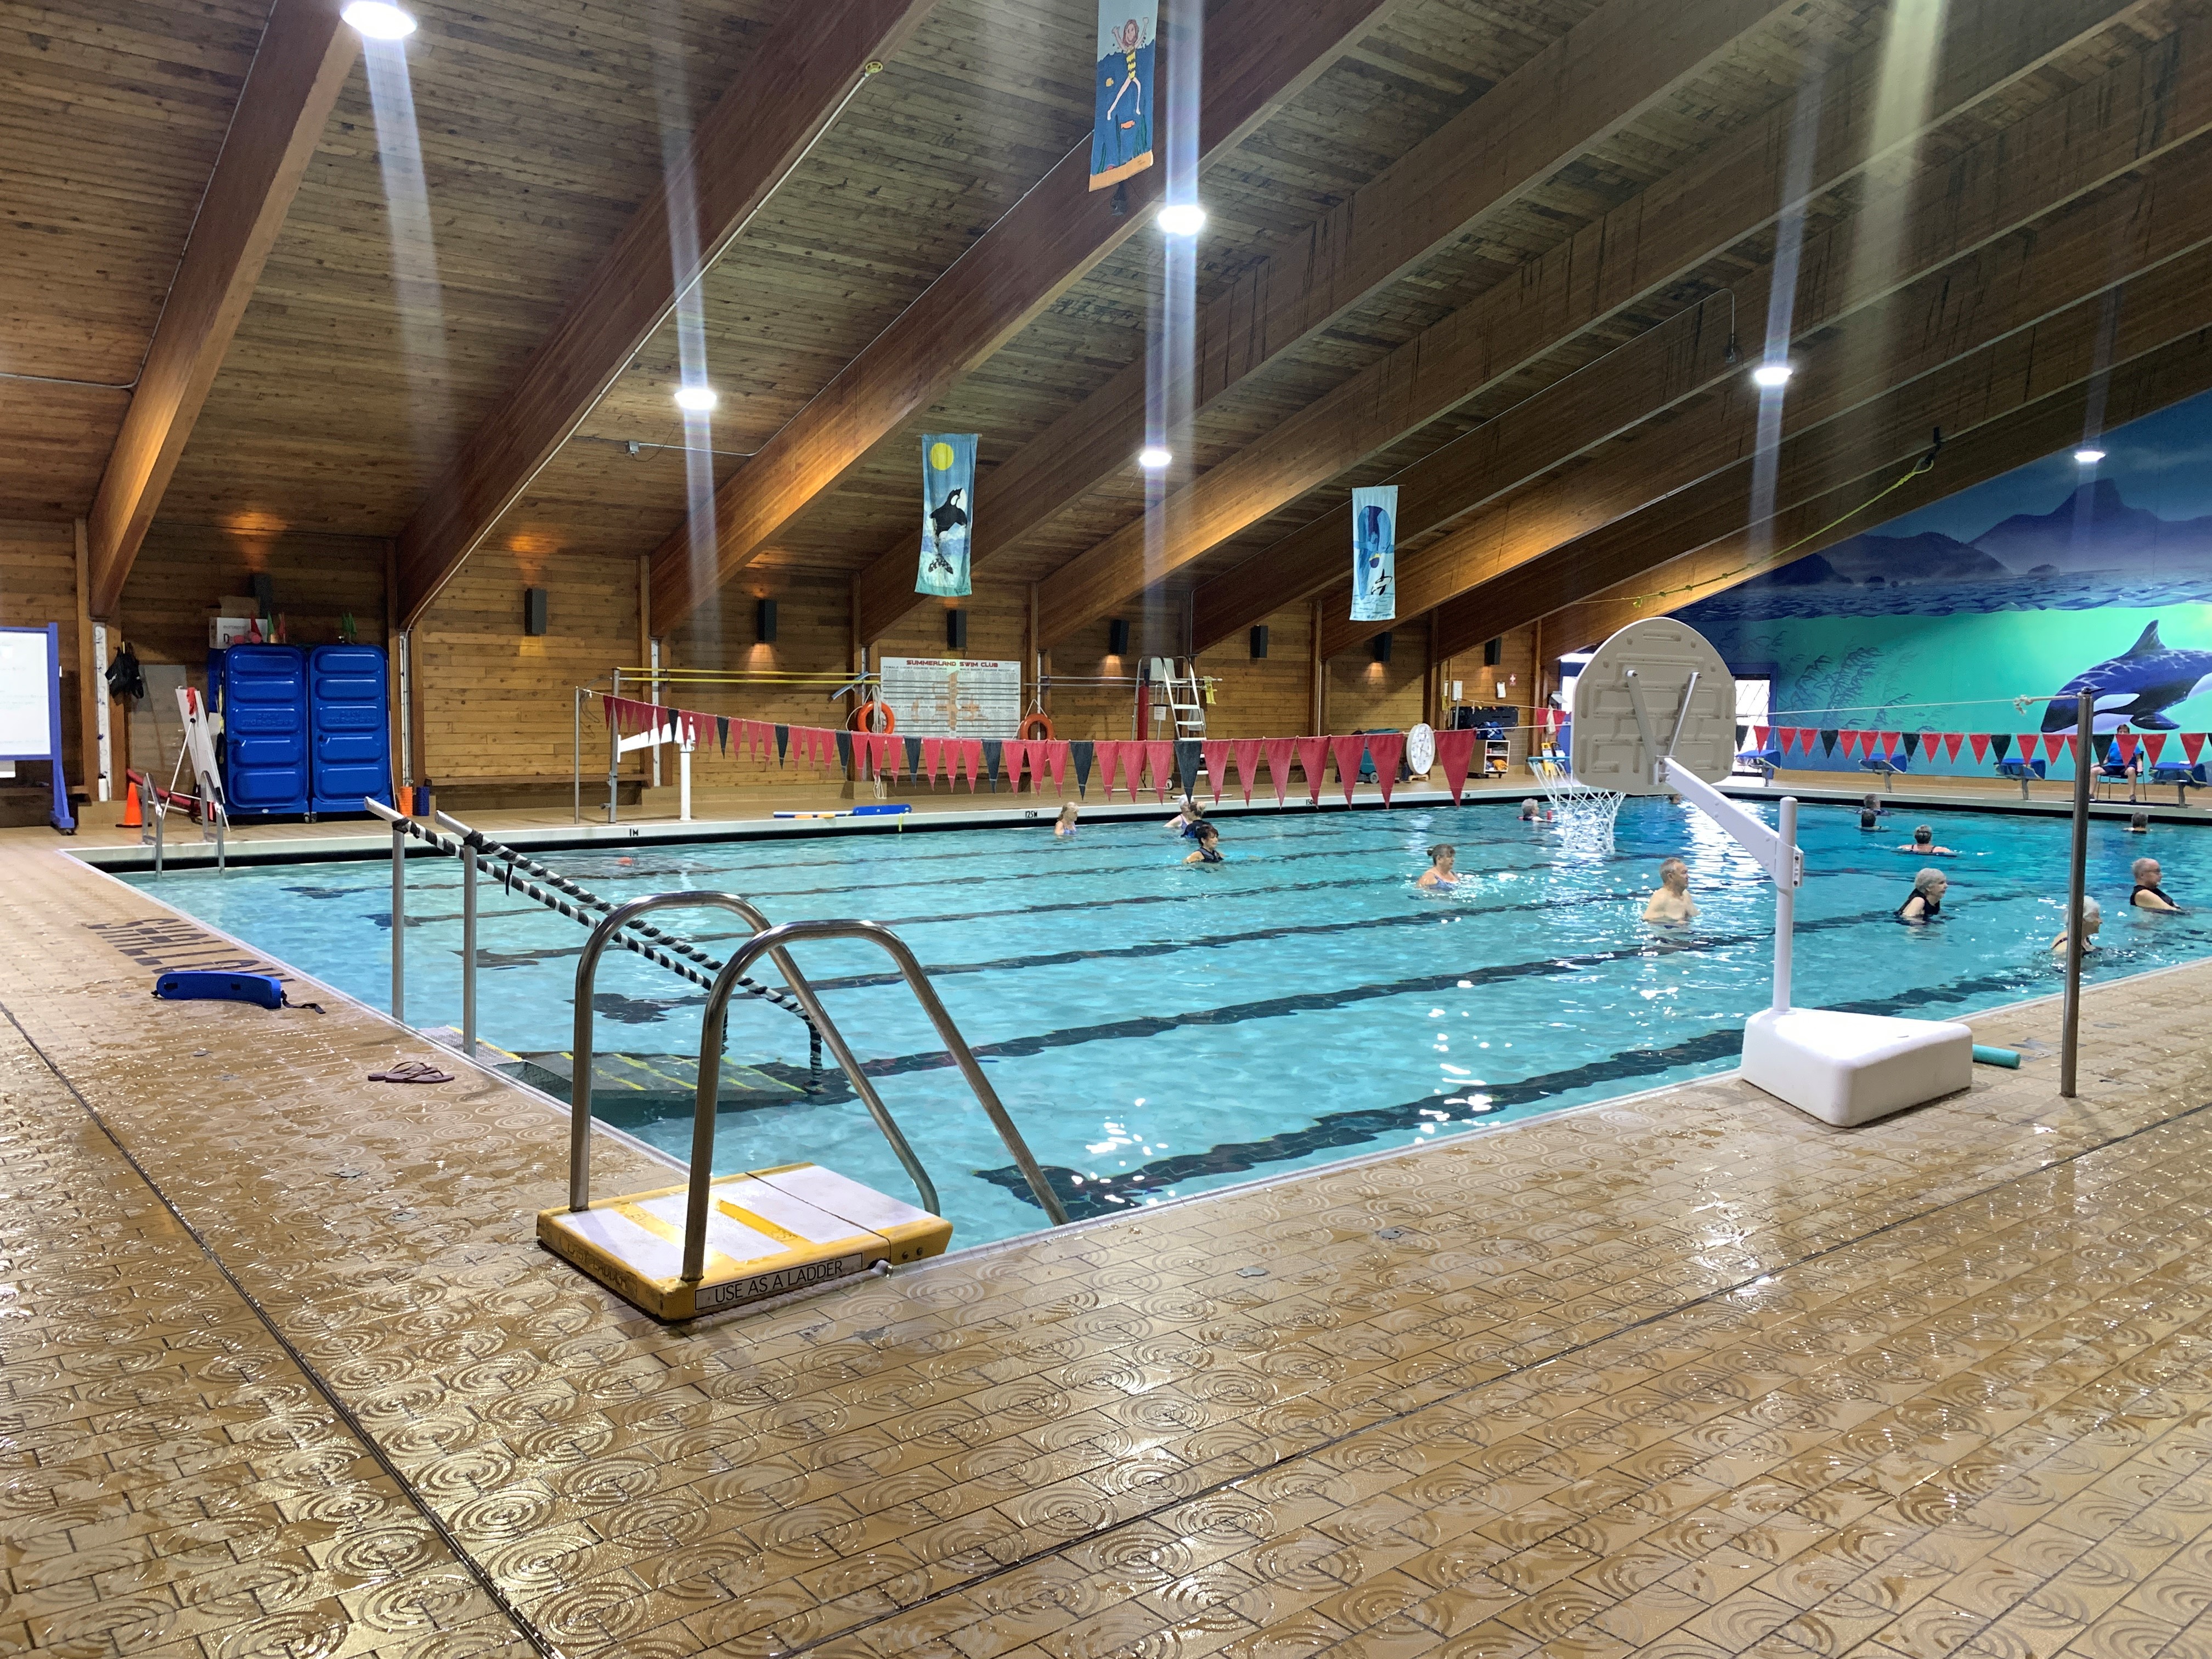 District of Summerland to consider options after aquatic centre referendum